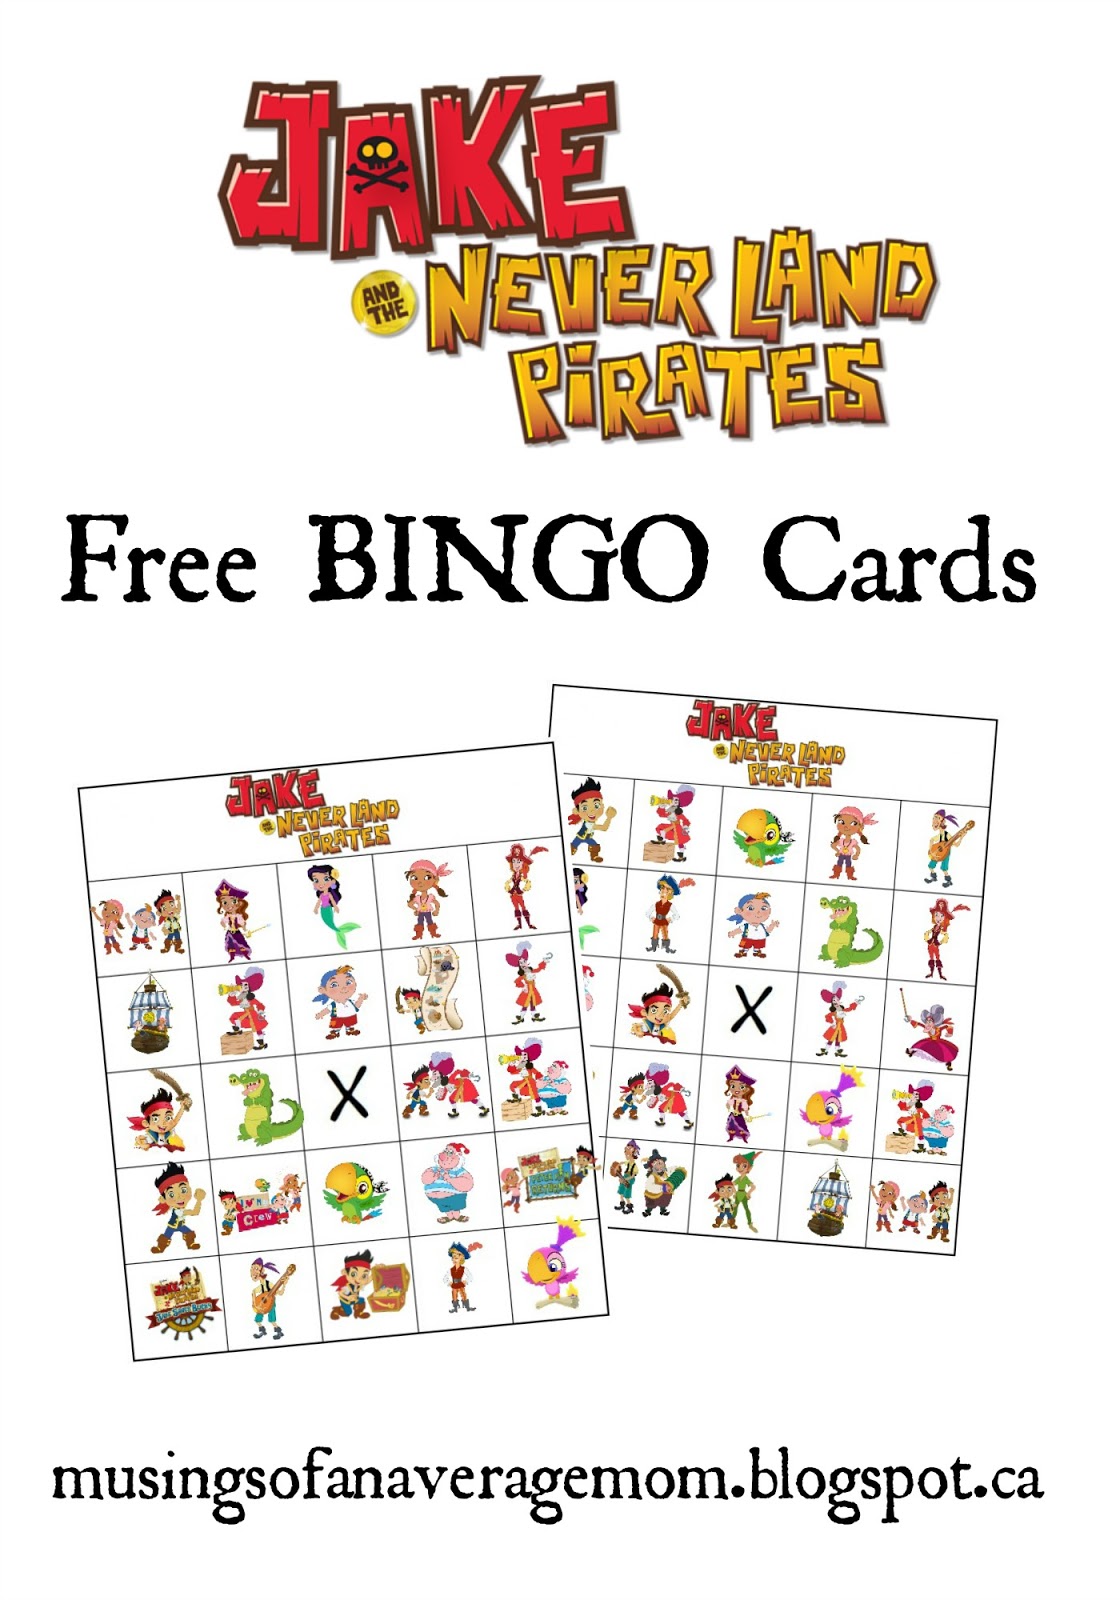 musings-of-an-average-mom-jake-and-the-neverland-pirates-bingo